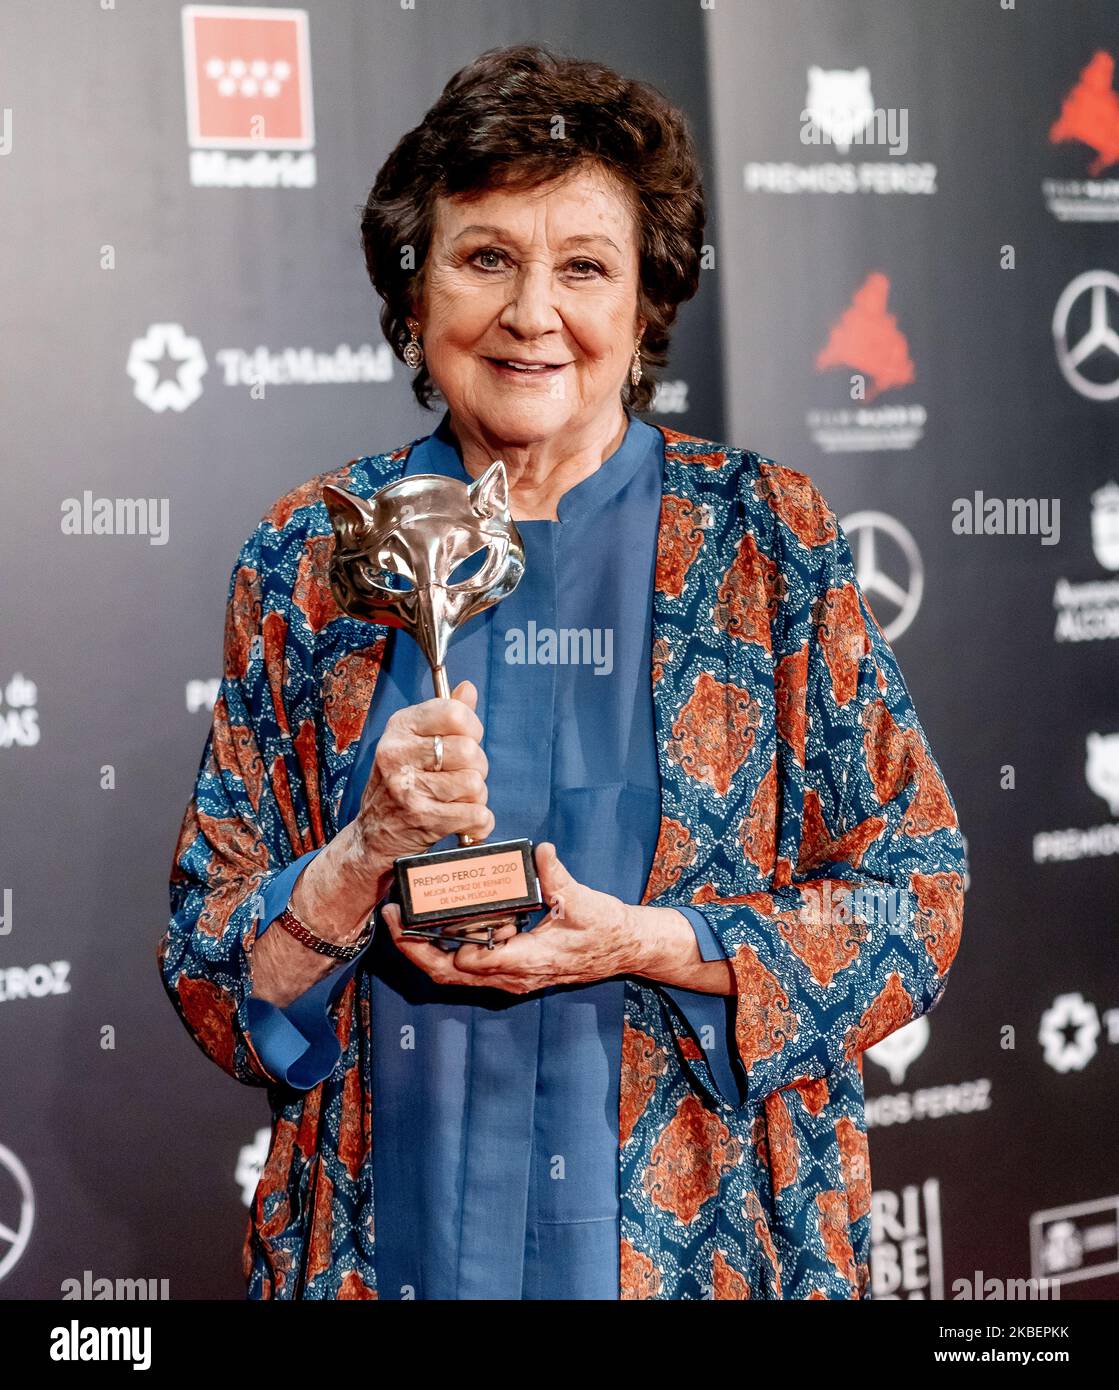 Julieta Serrano poses in the Press Room after winning the the best supporting actress Award during 'Feroz Awards' 2020 at Teatro Auditorio Ciudad de Alcobendas on January 16, 2020 in Madrid, Spain. (Miriam Vera/Coolmedia/NurPhoto) Stock Photo